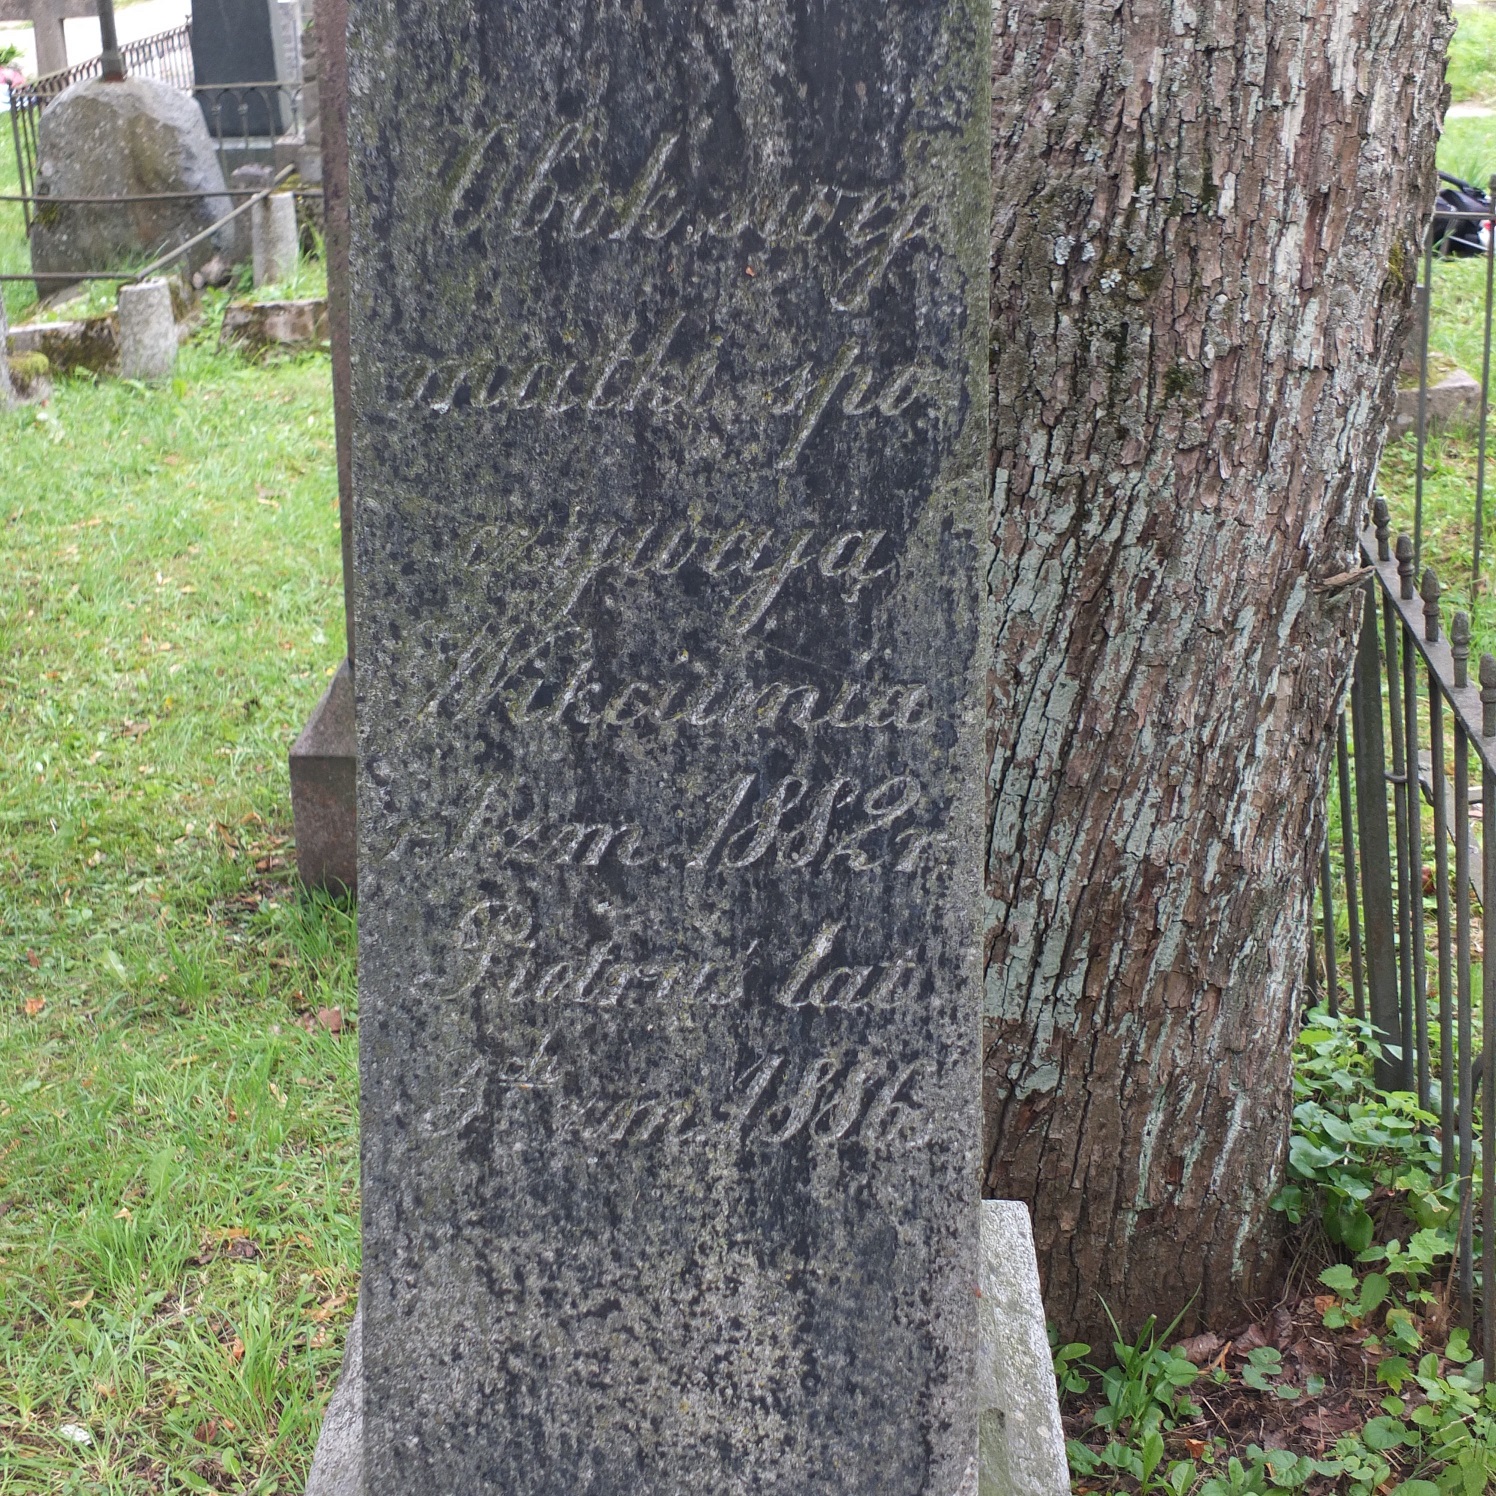 Fragment of the tombstone of the Hoppen family, Na Rossa cemetery in Vilnius, as of 2013.